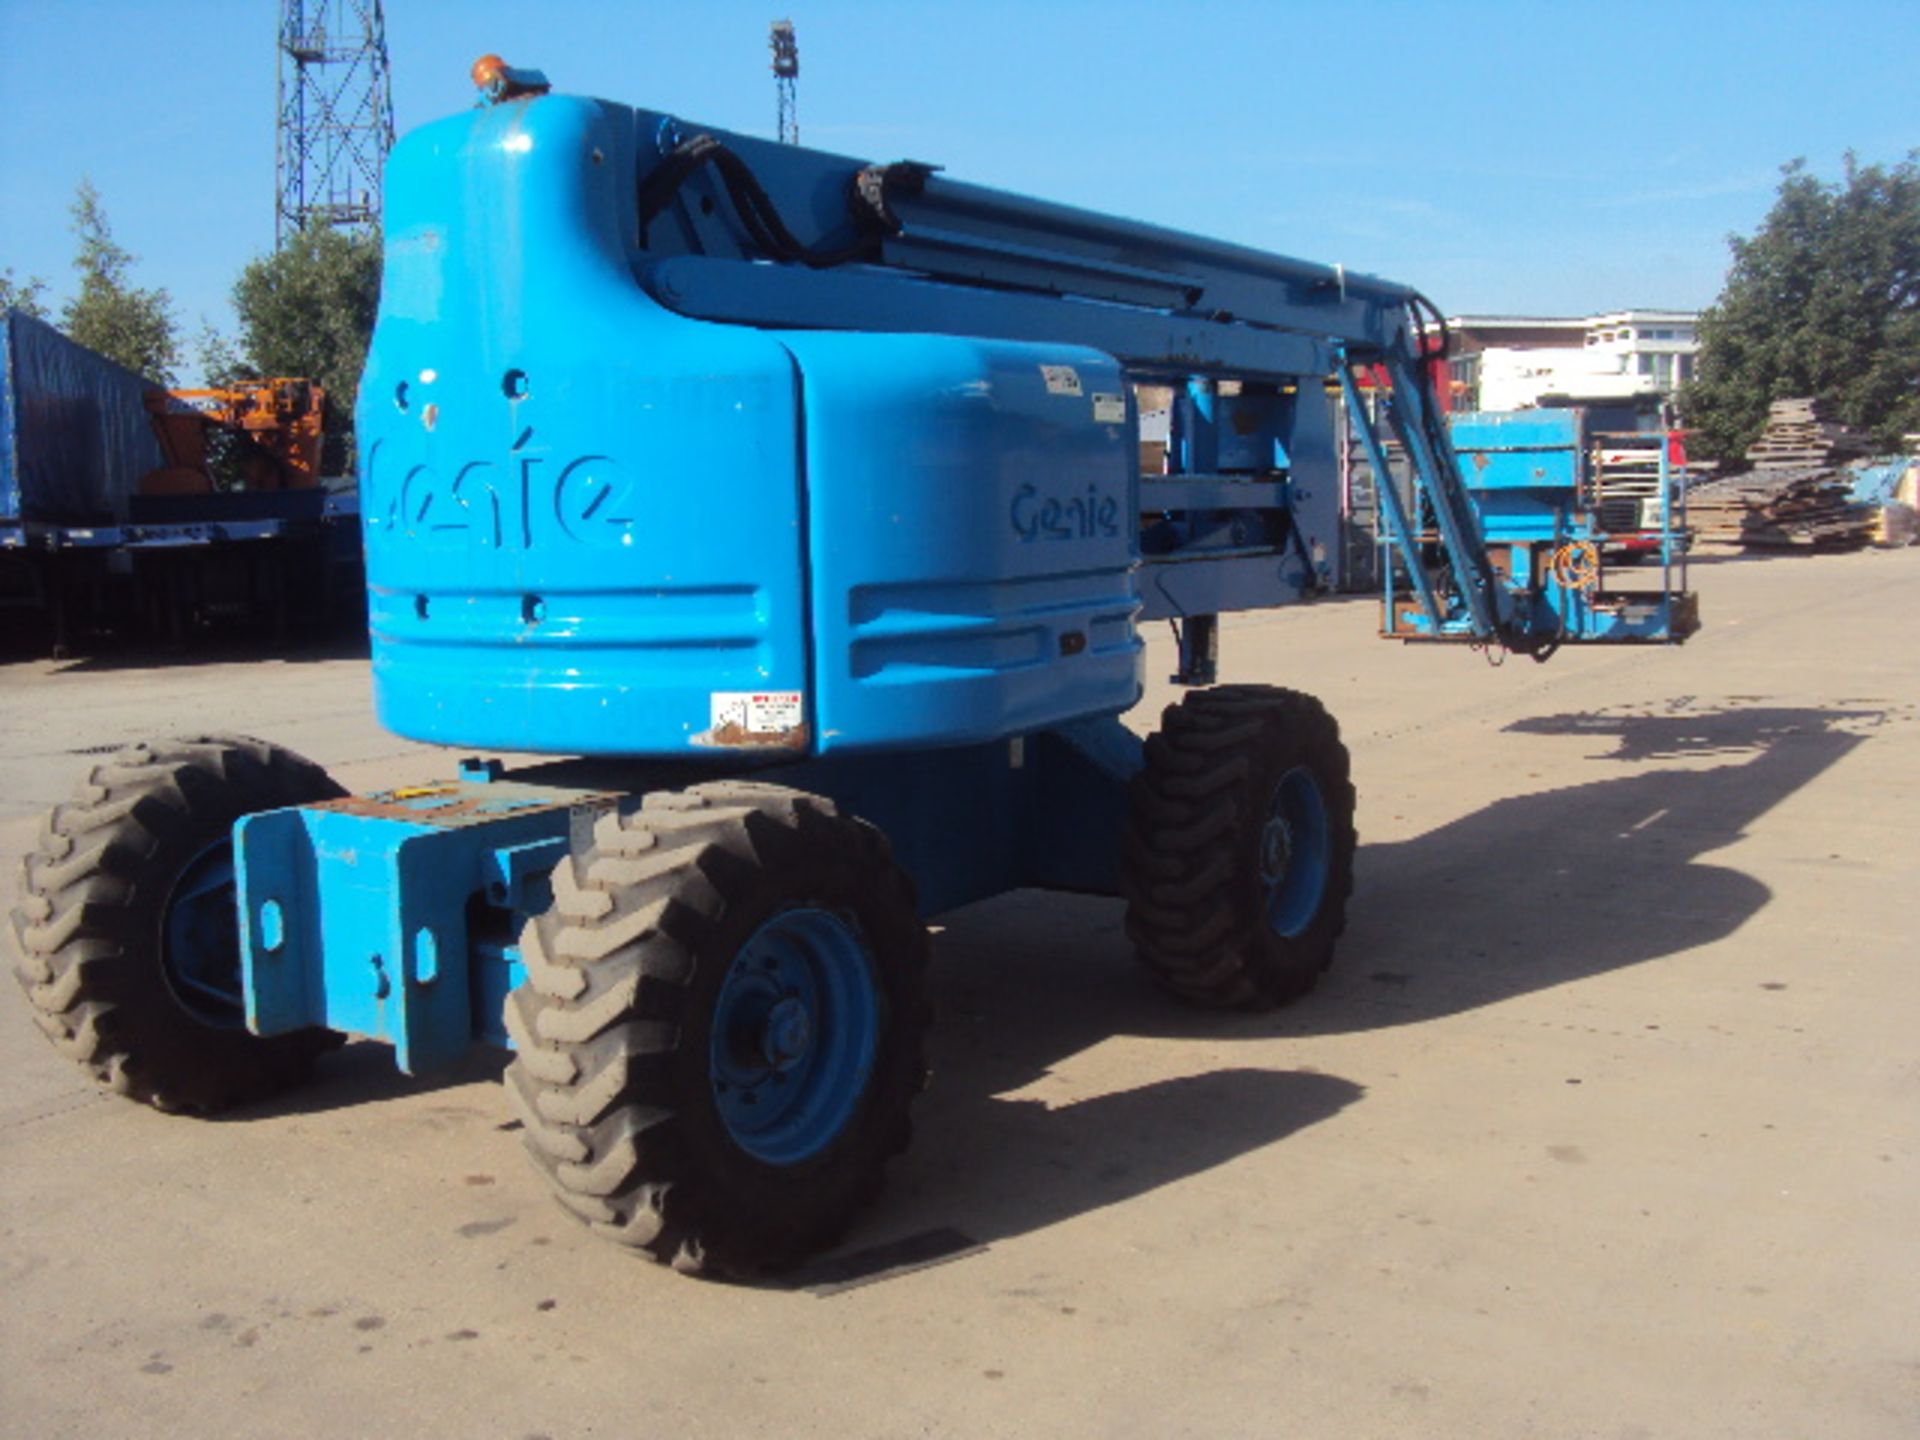 1999 GENIE Z60-34 60' 2wd articulated boom lift S/n: Z60-1983) (4991 recorded hours) (RDL) - Image 3 of 9